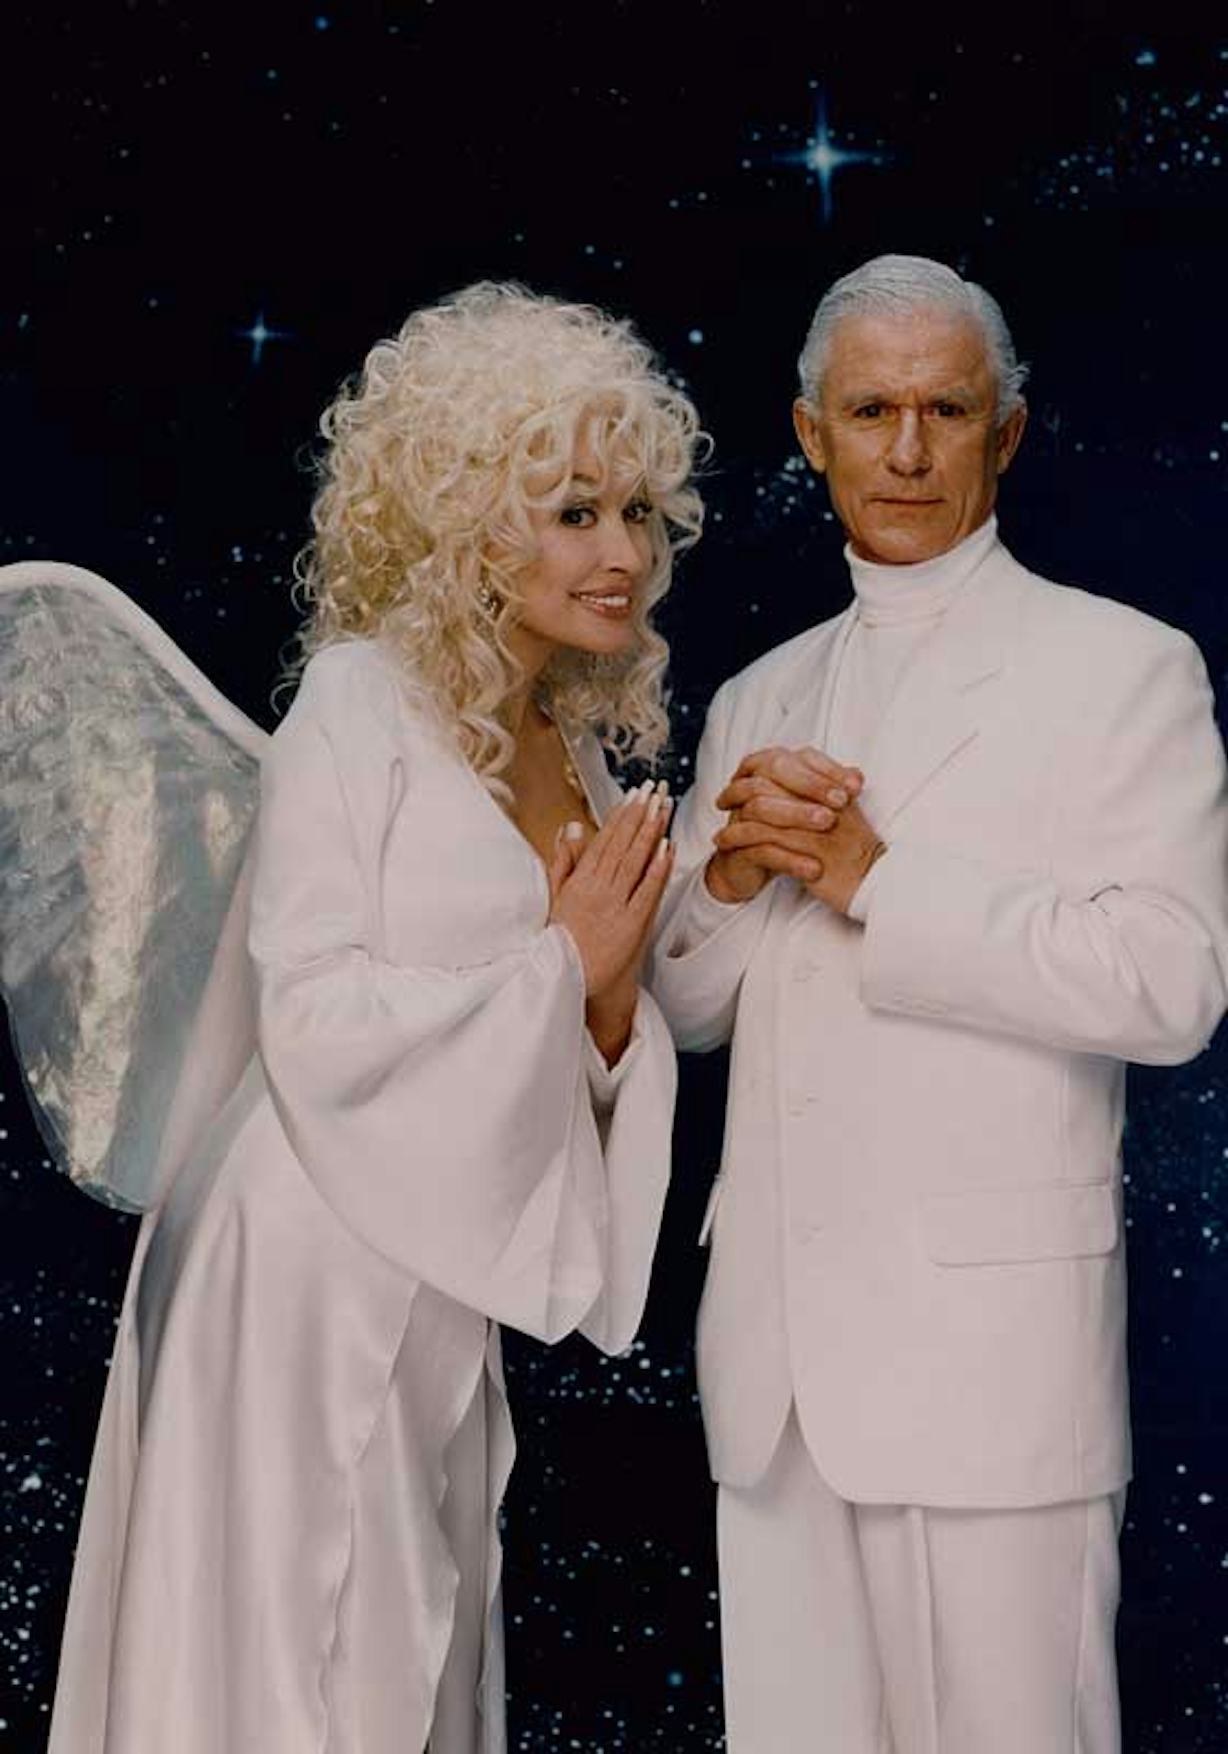 Dolly Parton's 'Unlikely Angel' Is The Christmas Movie You Need This